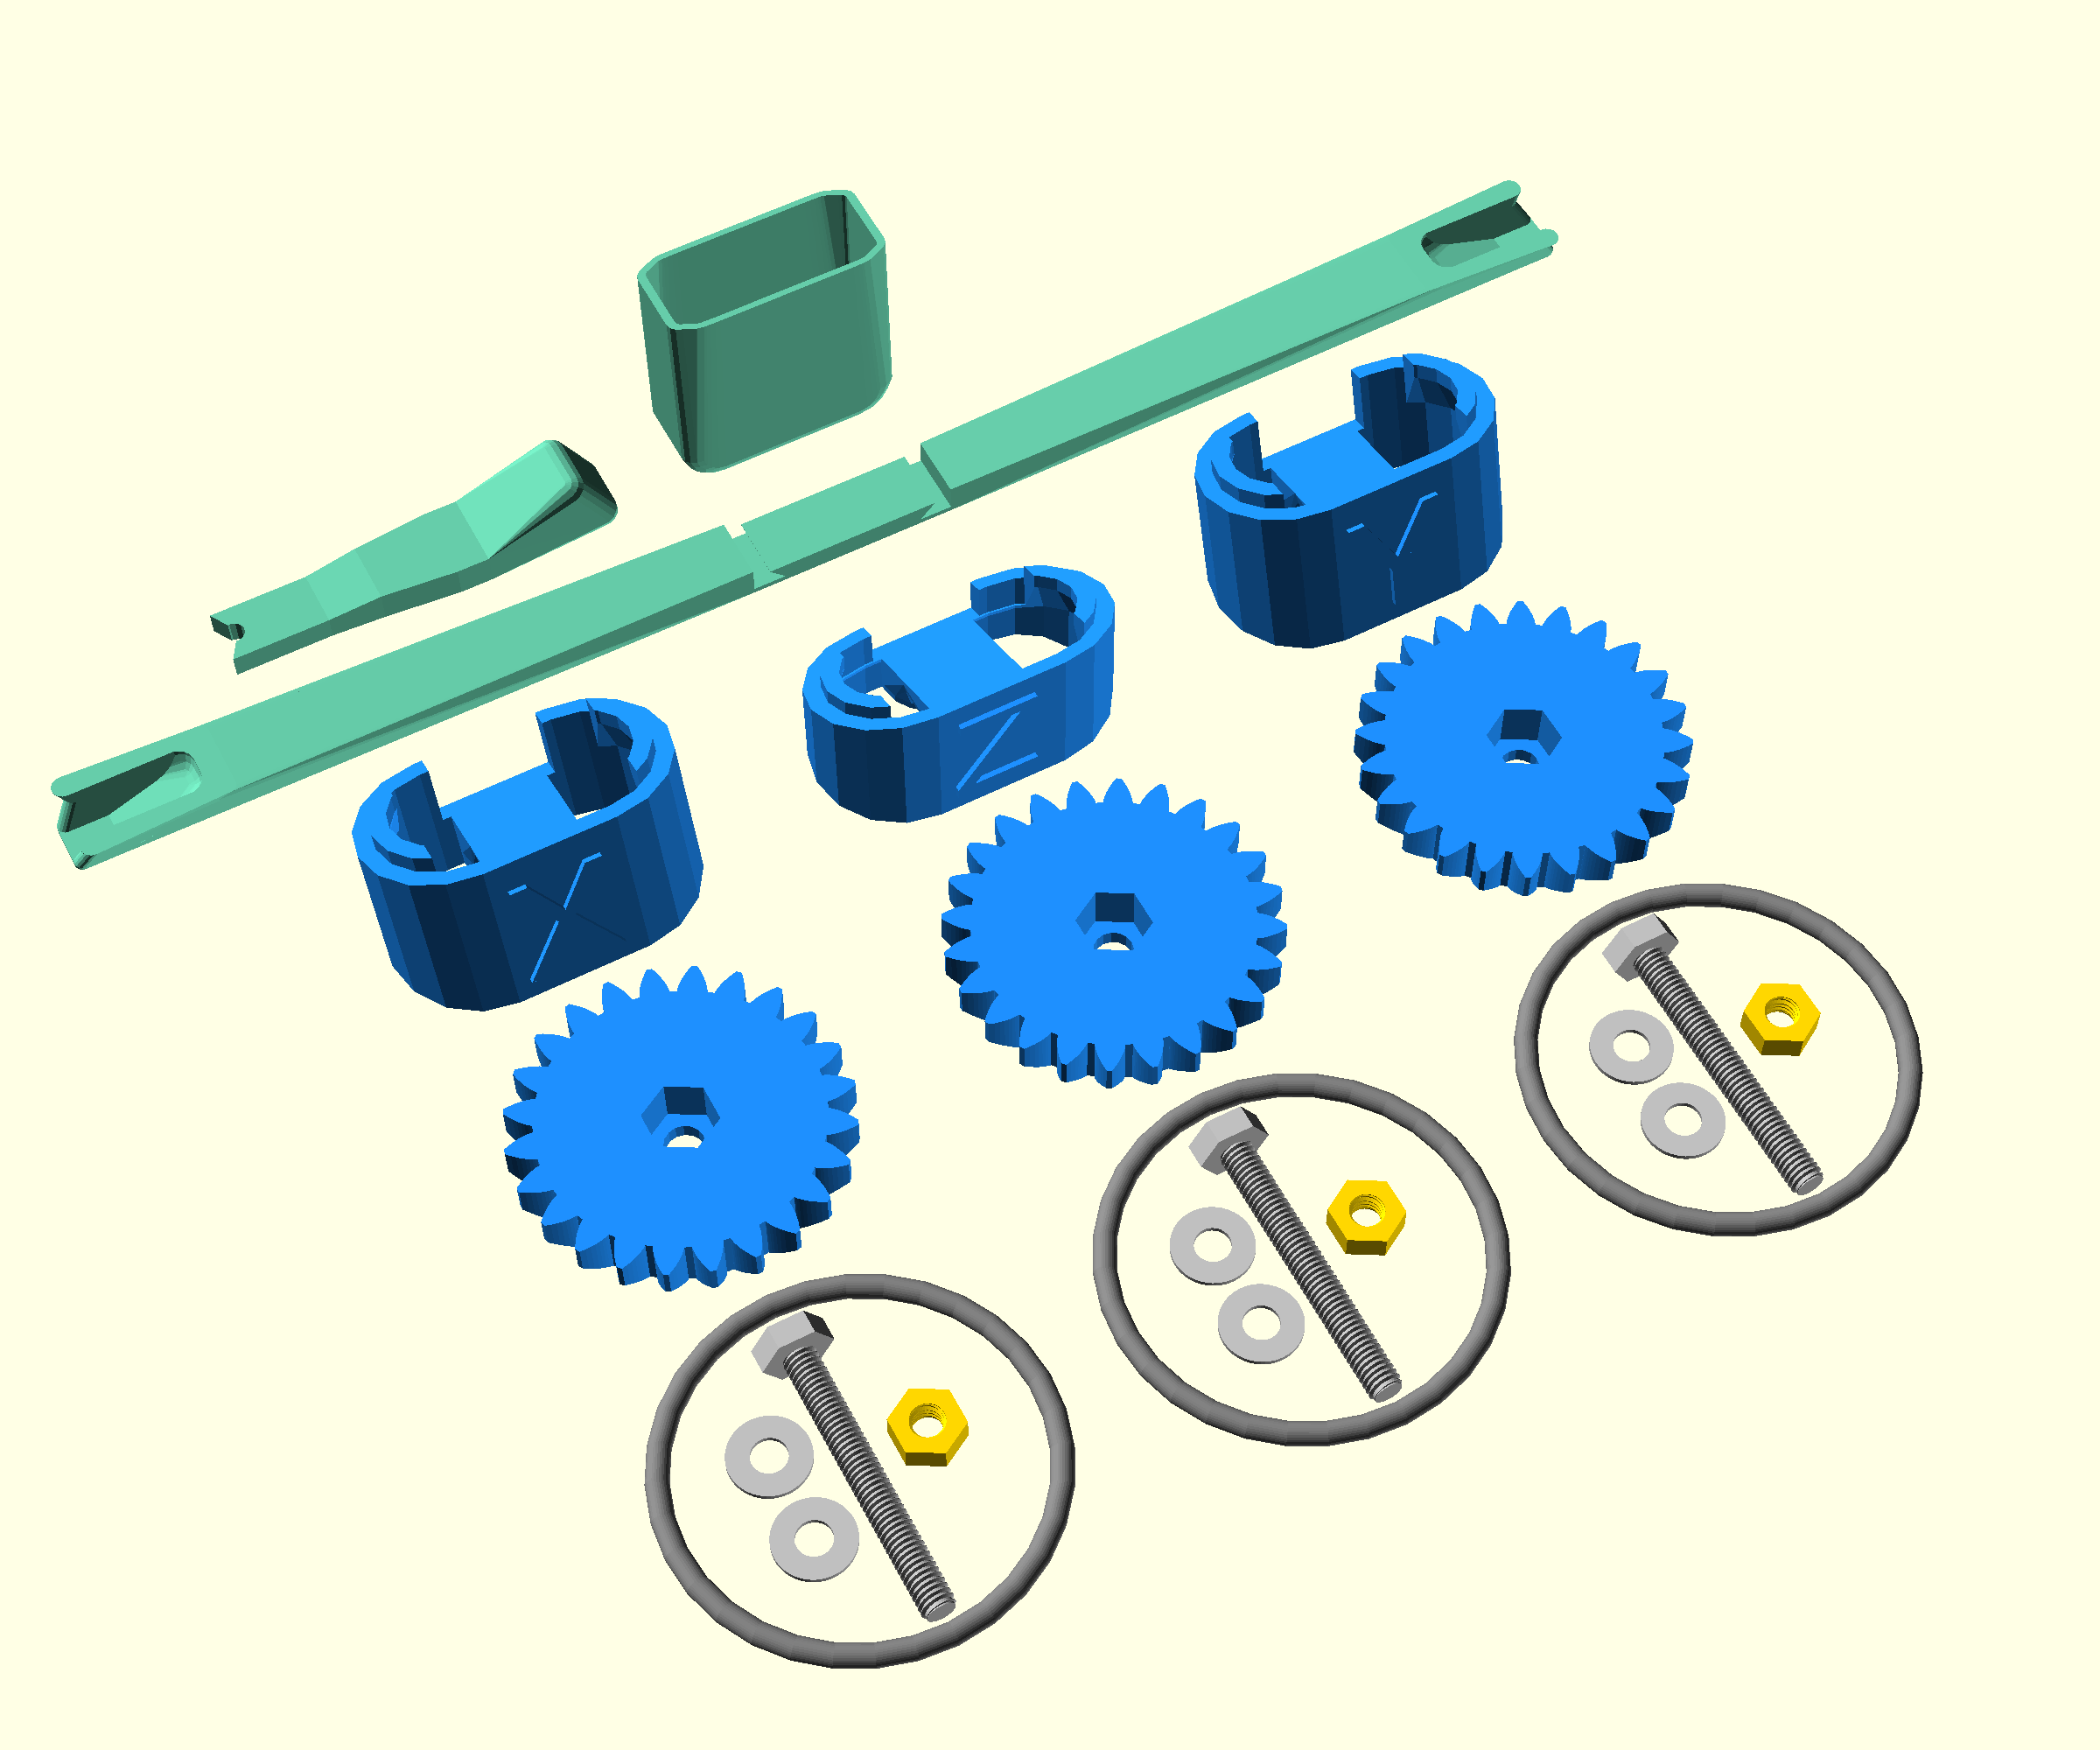 Parts required for actuator assembly